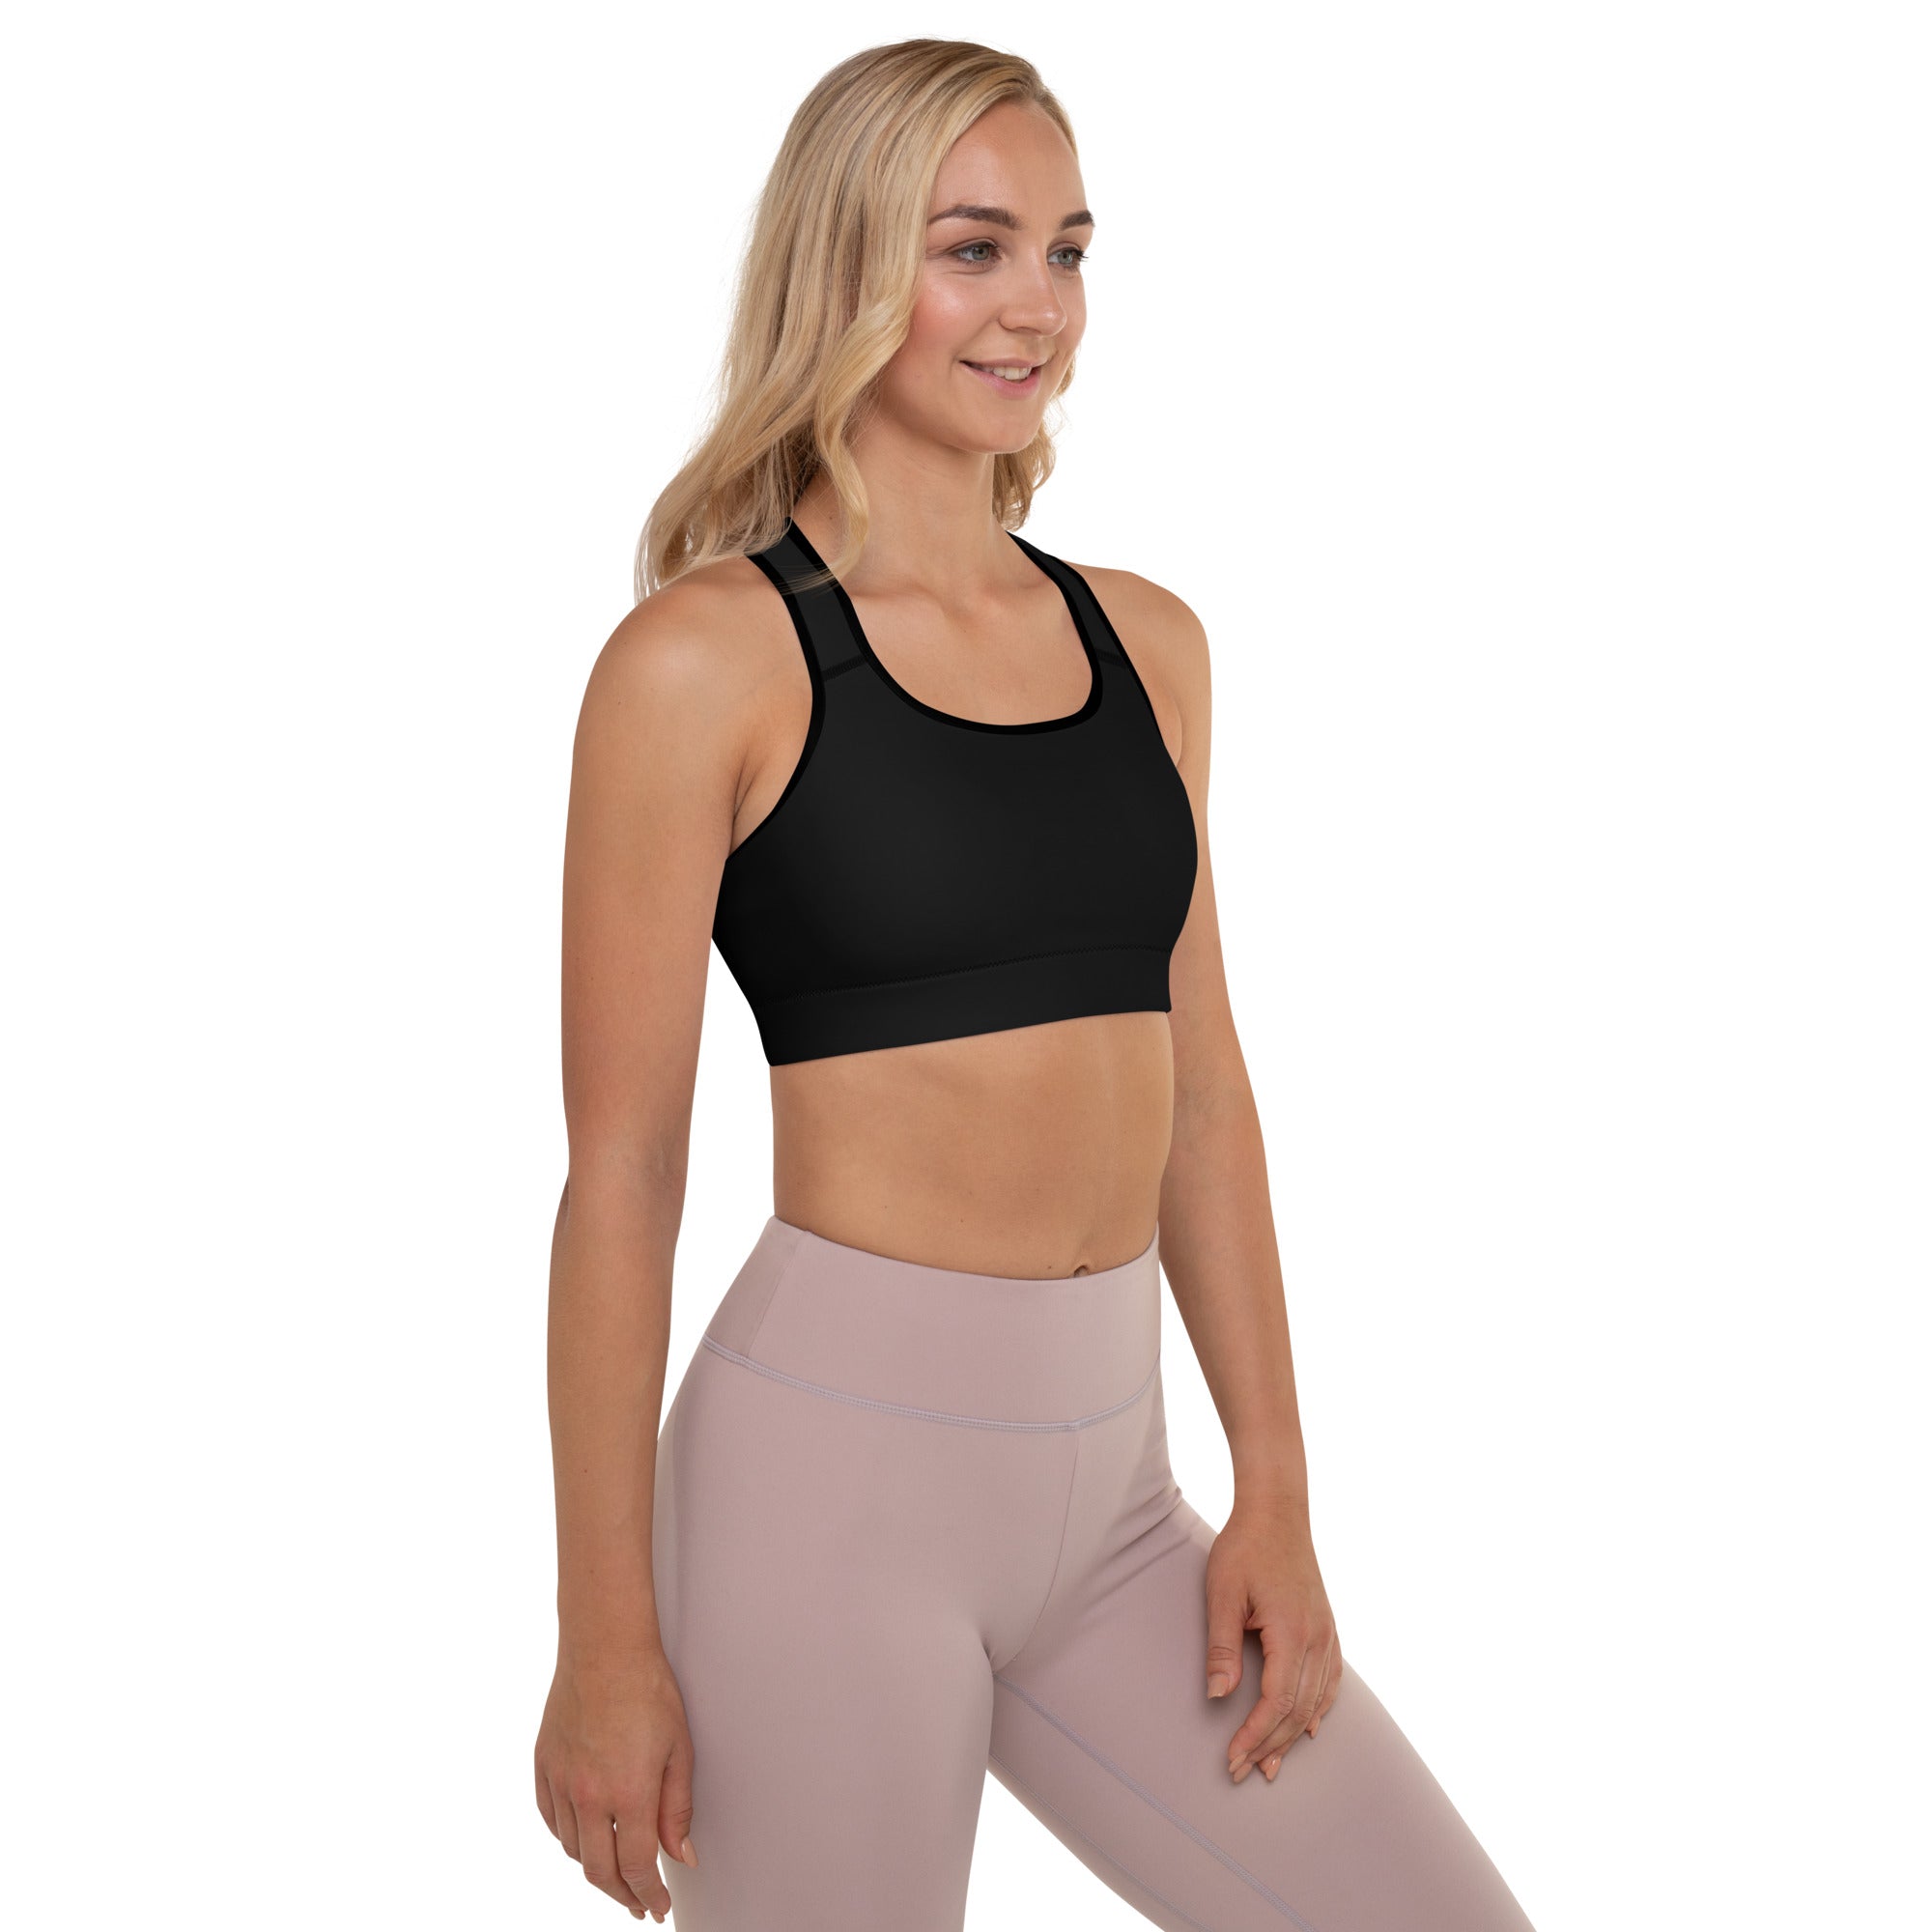 A woman wearing a Sweetest Paw Padded Sports Bra Black top and pink leggings.